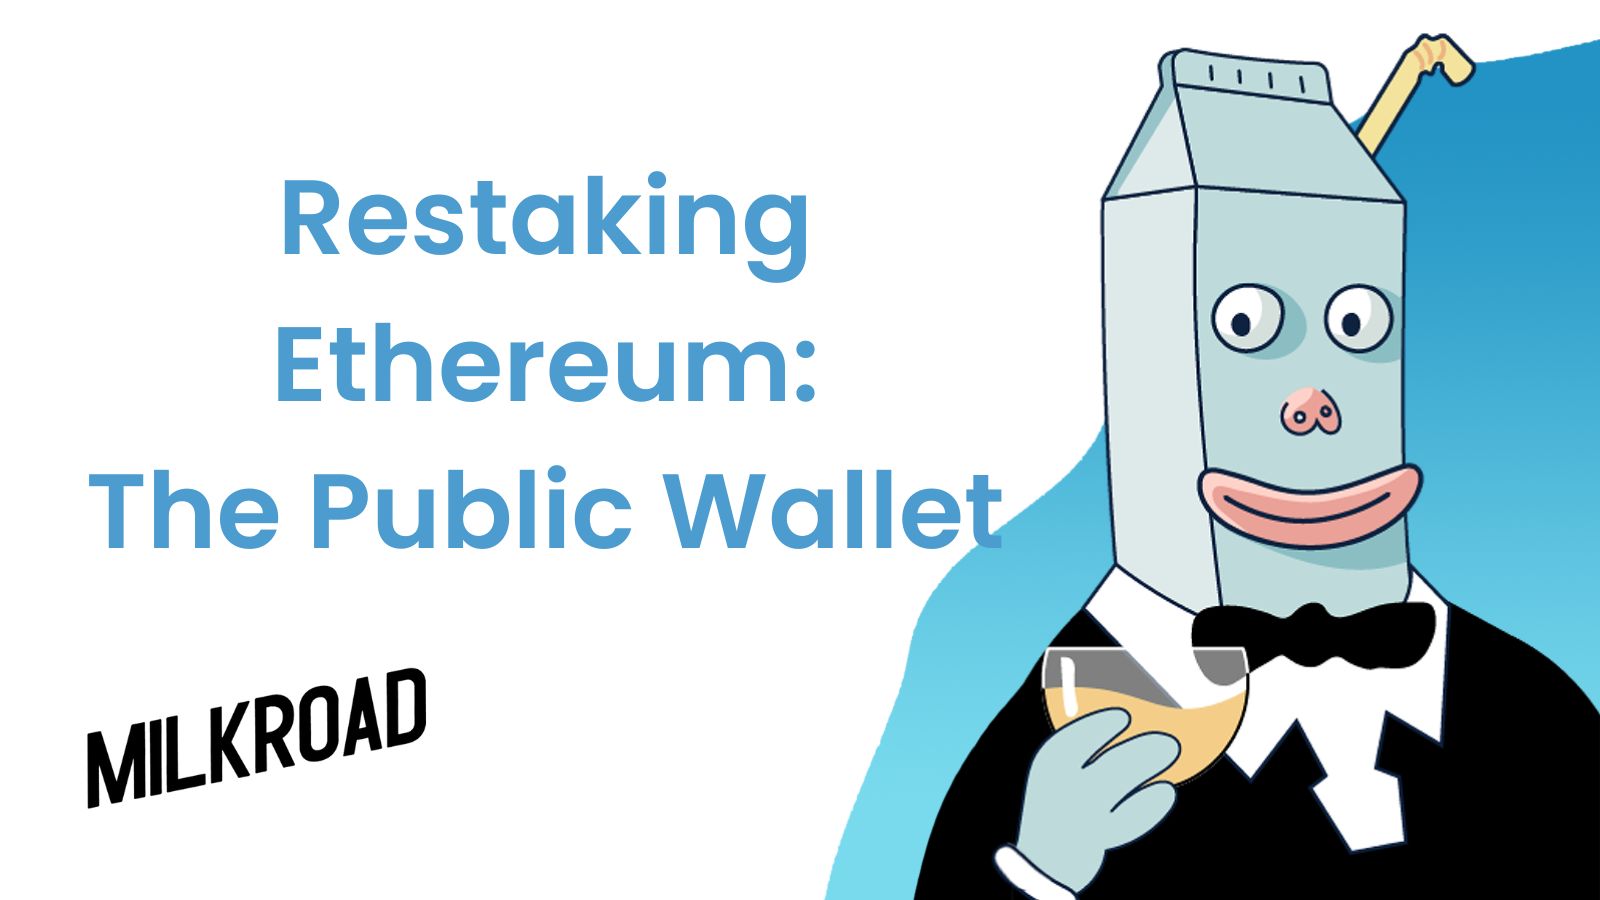 Restaking Ethereum with the Milk Road public wallet